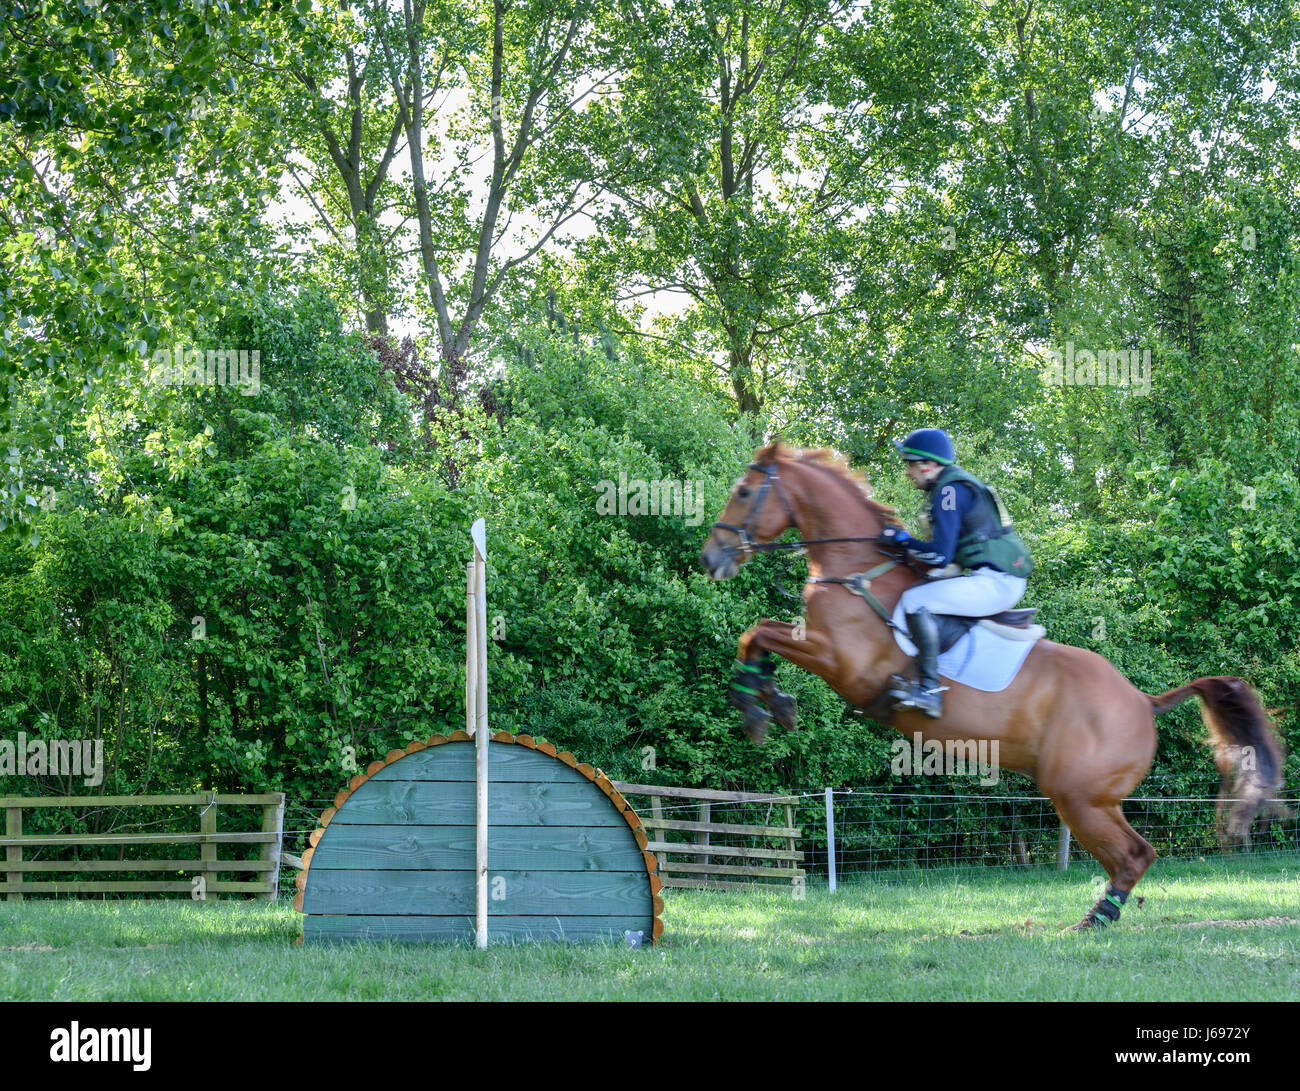 Rockingham Castle grounds, Corby, England. Saturday 20th May 2017. Sam Gillespie and his horse Fernhill leap an obstacle in the cross country phase phase of the Rockingham International Horse Trials on Saturday 20th May 2017 in the grounds of the norman Rockingham castle at Corby, England. Credit: miscellany/Alamy Live News Stock Photo